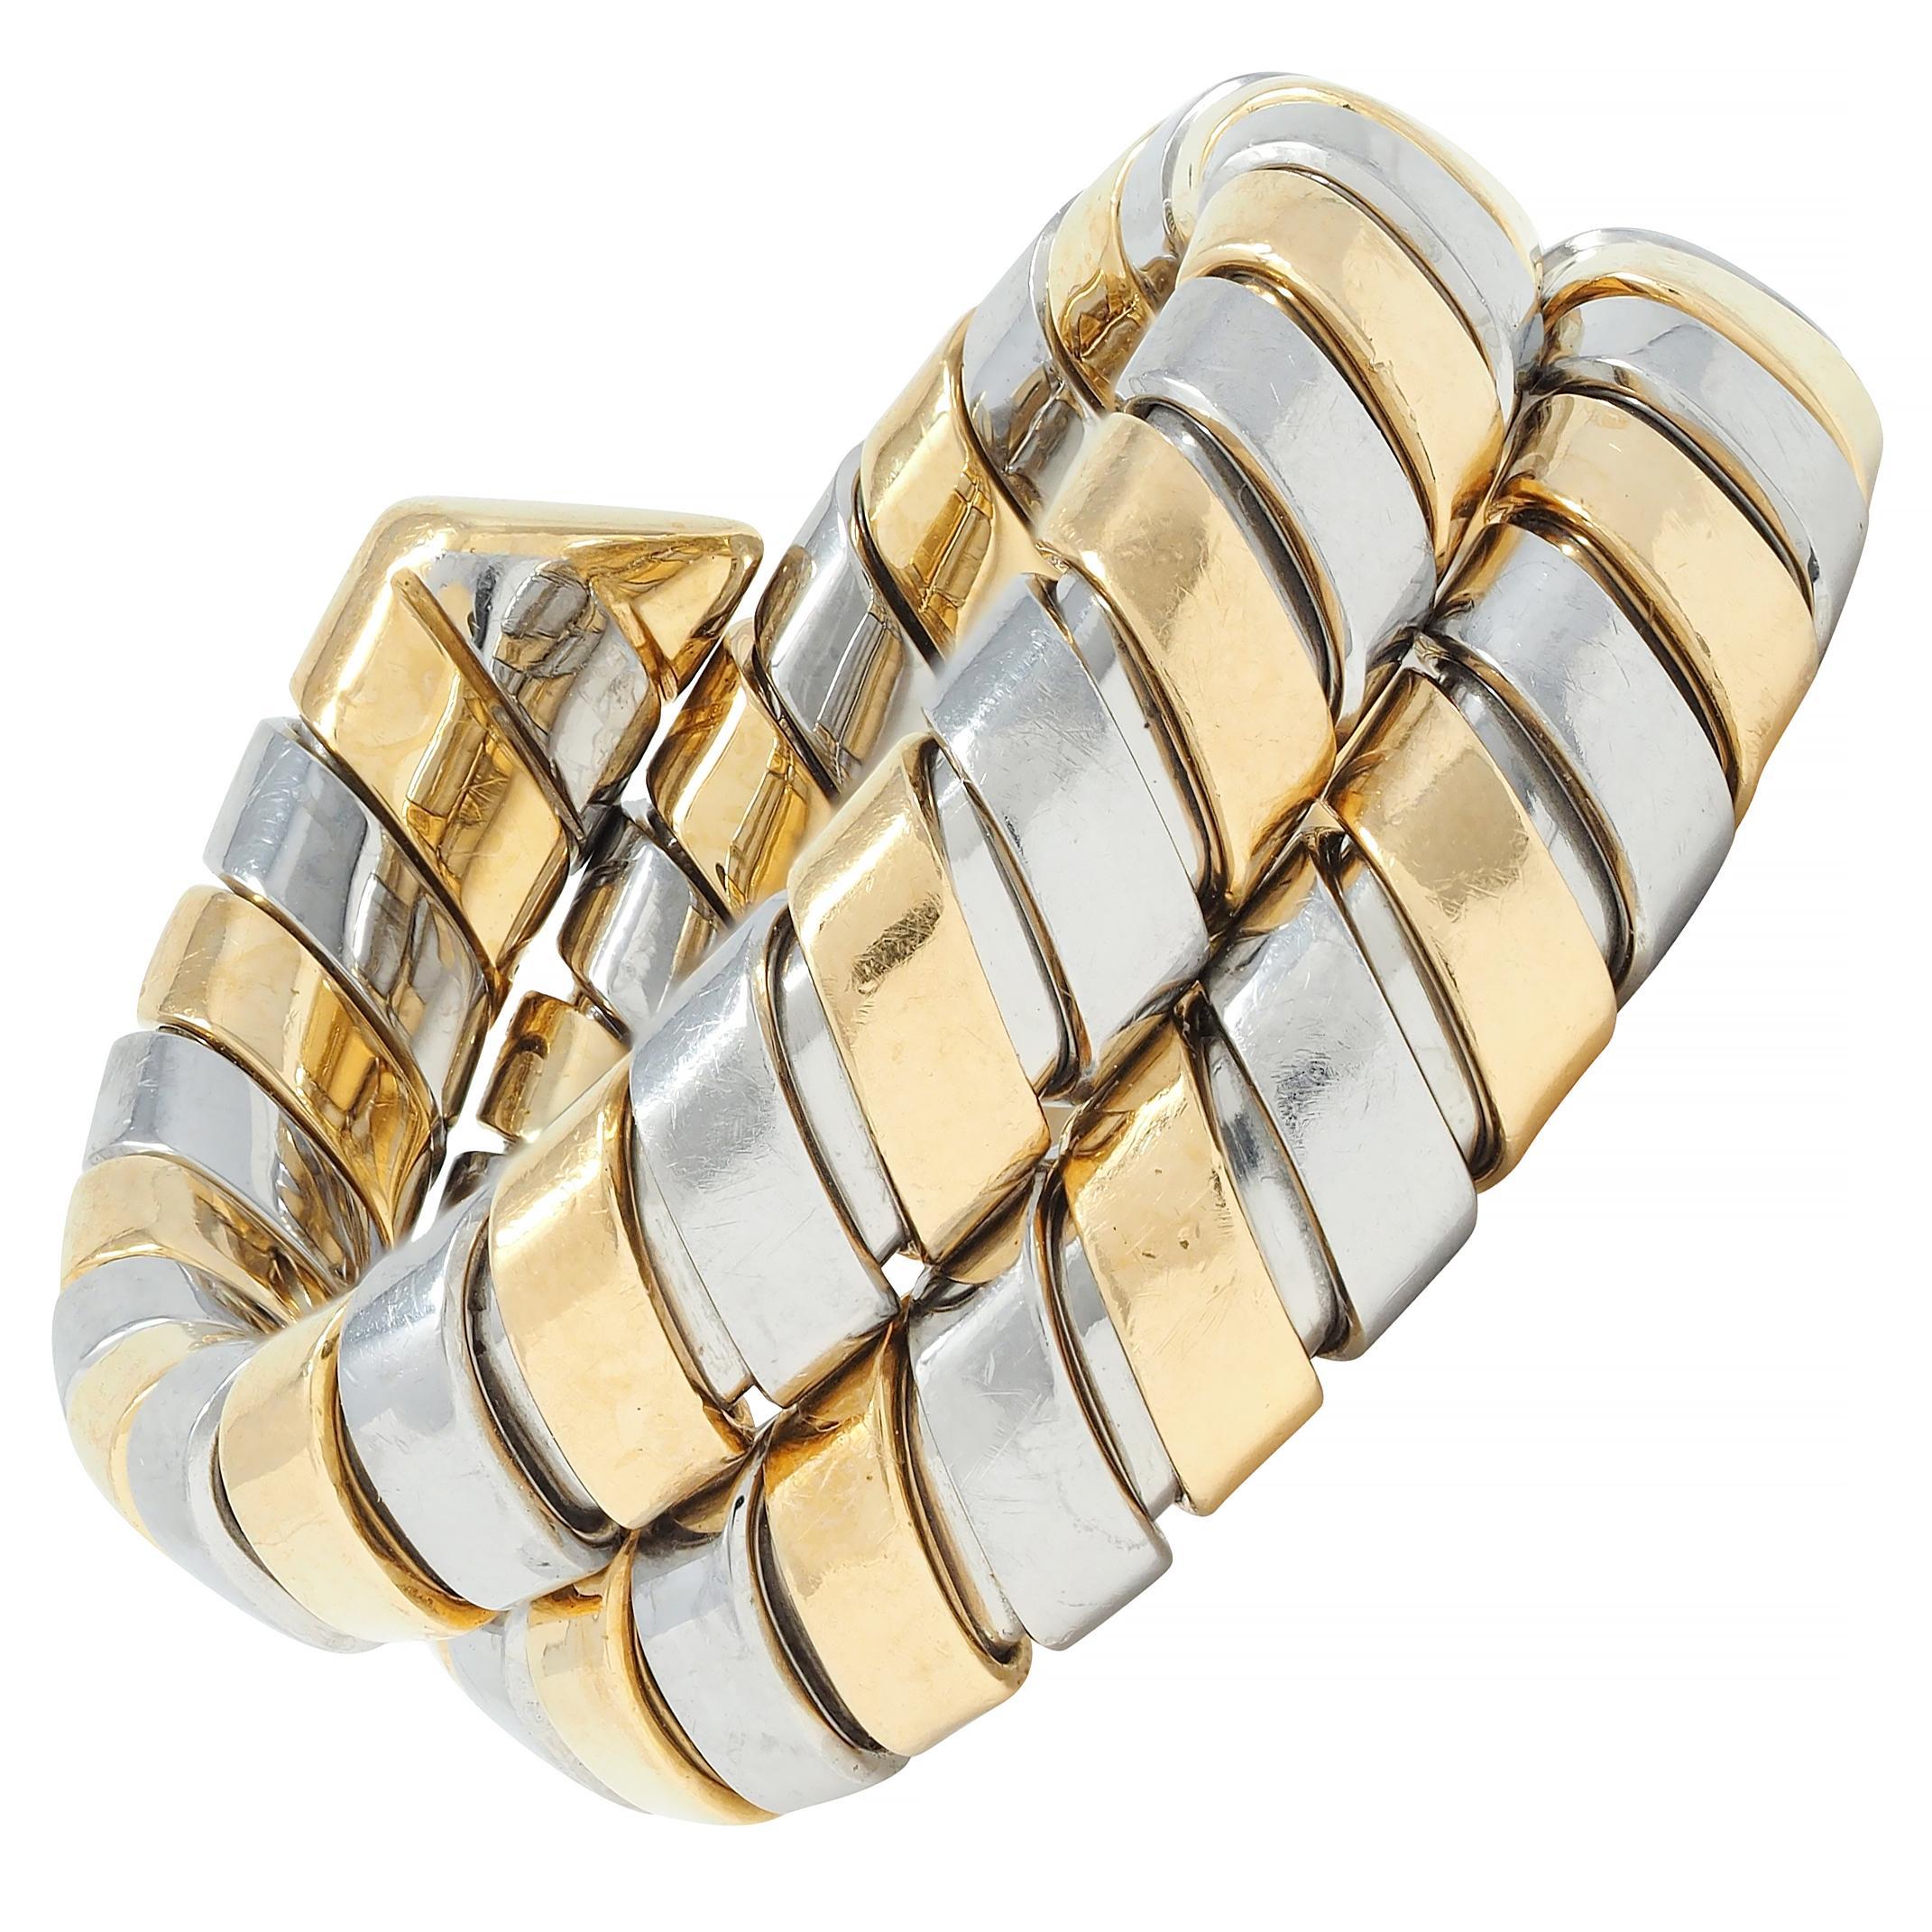 Designed as a triple wrap style ring comprised of segmented tubogas
Segments are high polished stainless steel and yellow gold 
With considerable flex
Stamped with Italian assay marks for 18 karat gold 
Tested as stainless steel
Numbered and fully